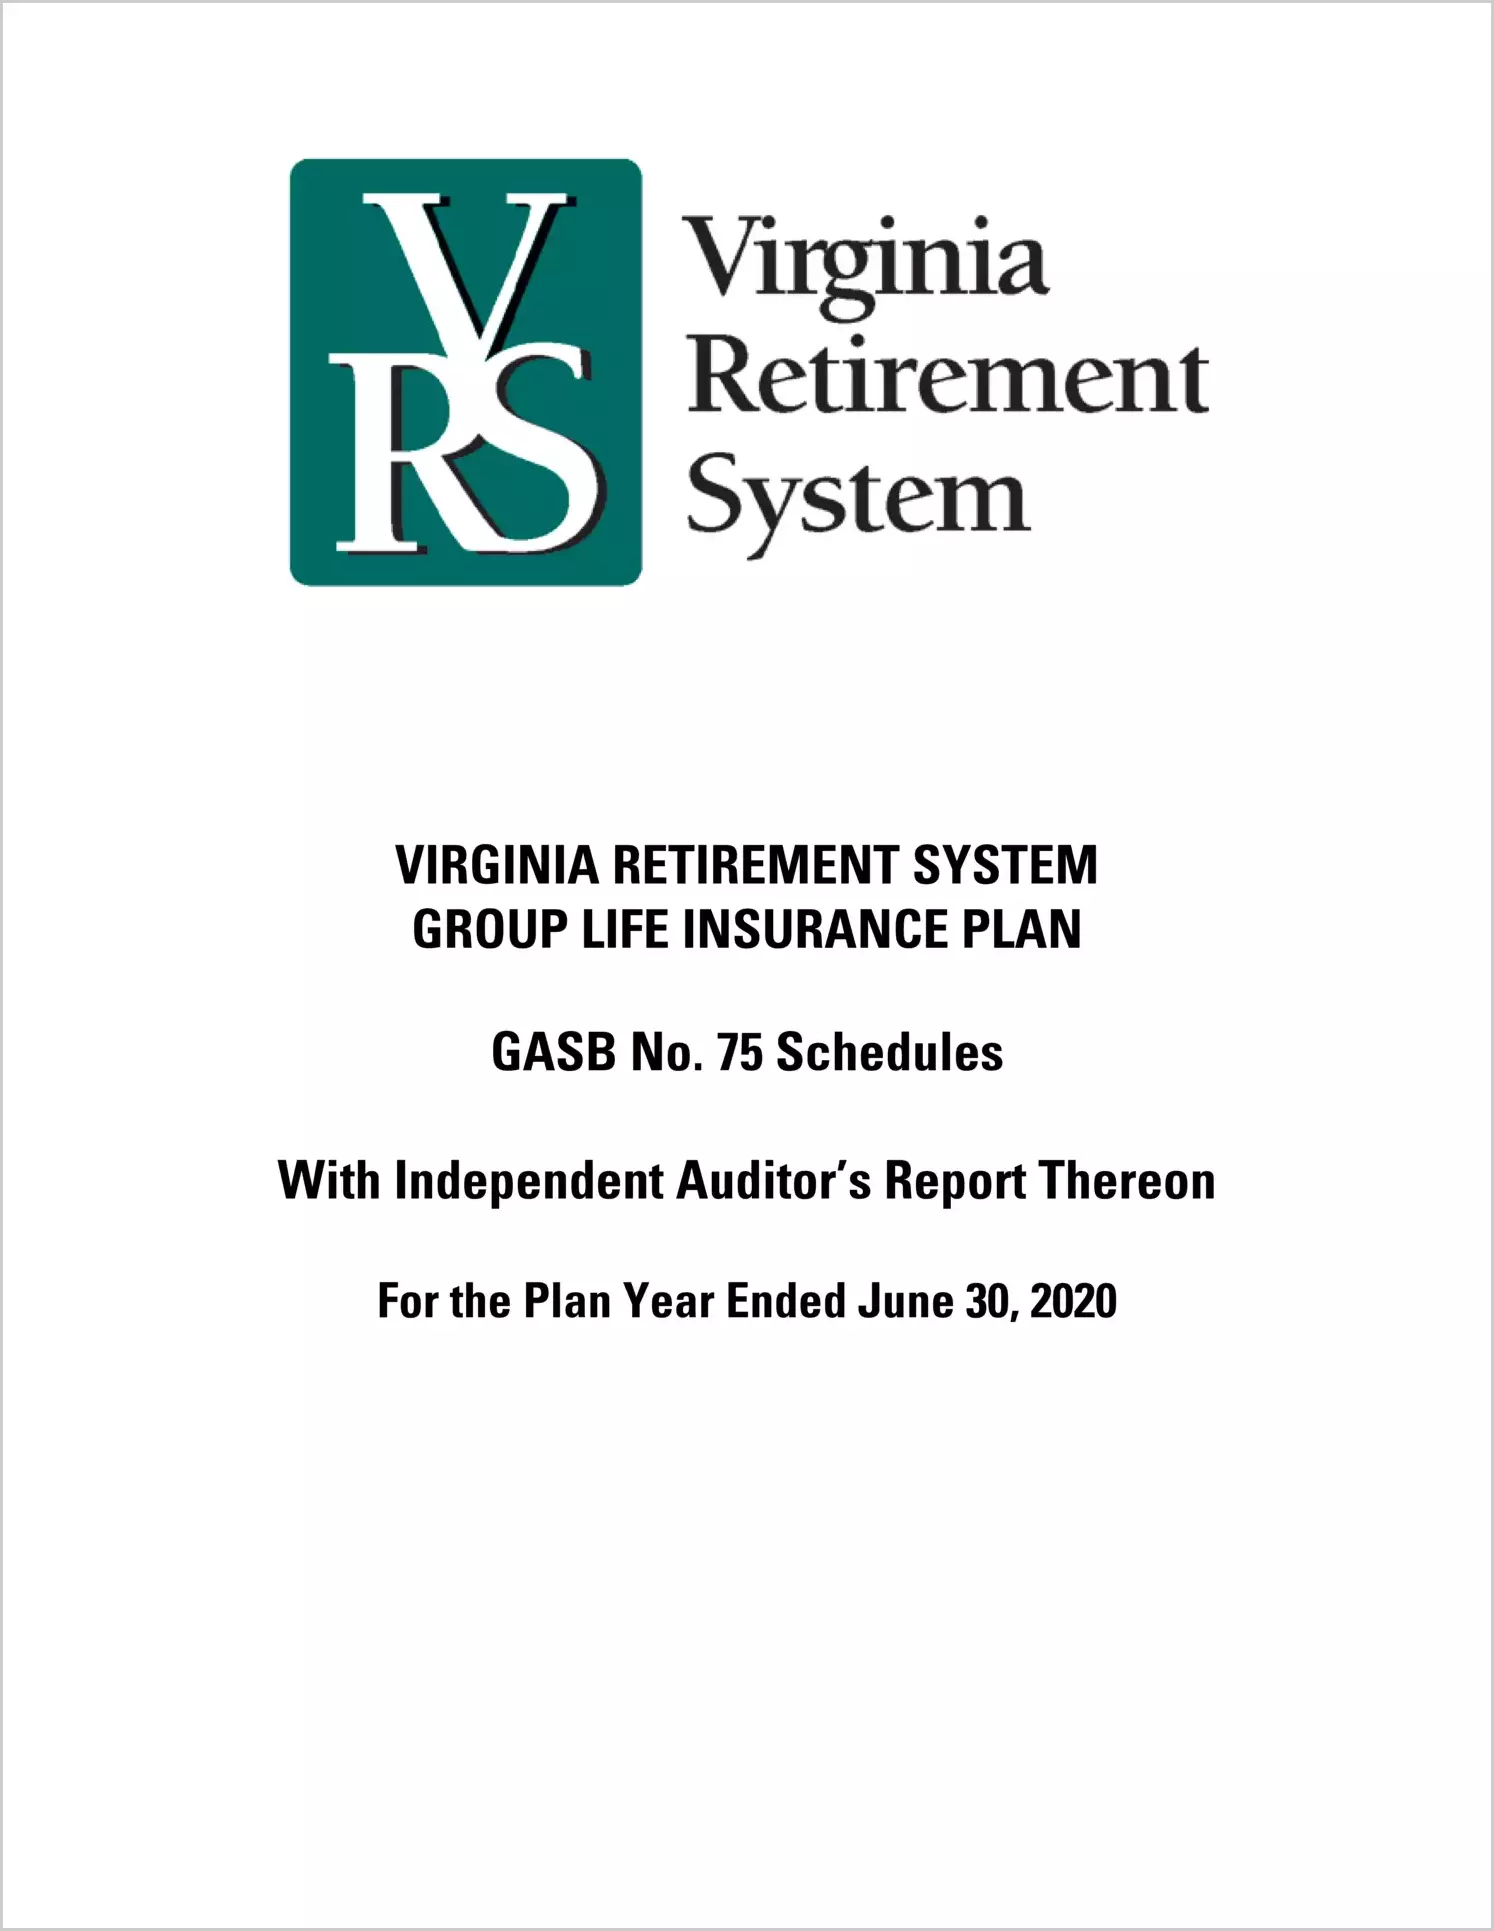 GASB 75 Schedules - Virginia Retirement System Group Life Insurance Plan for the year ended June 30, 2020